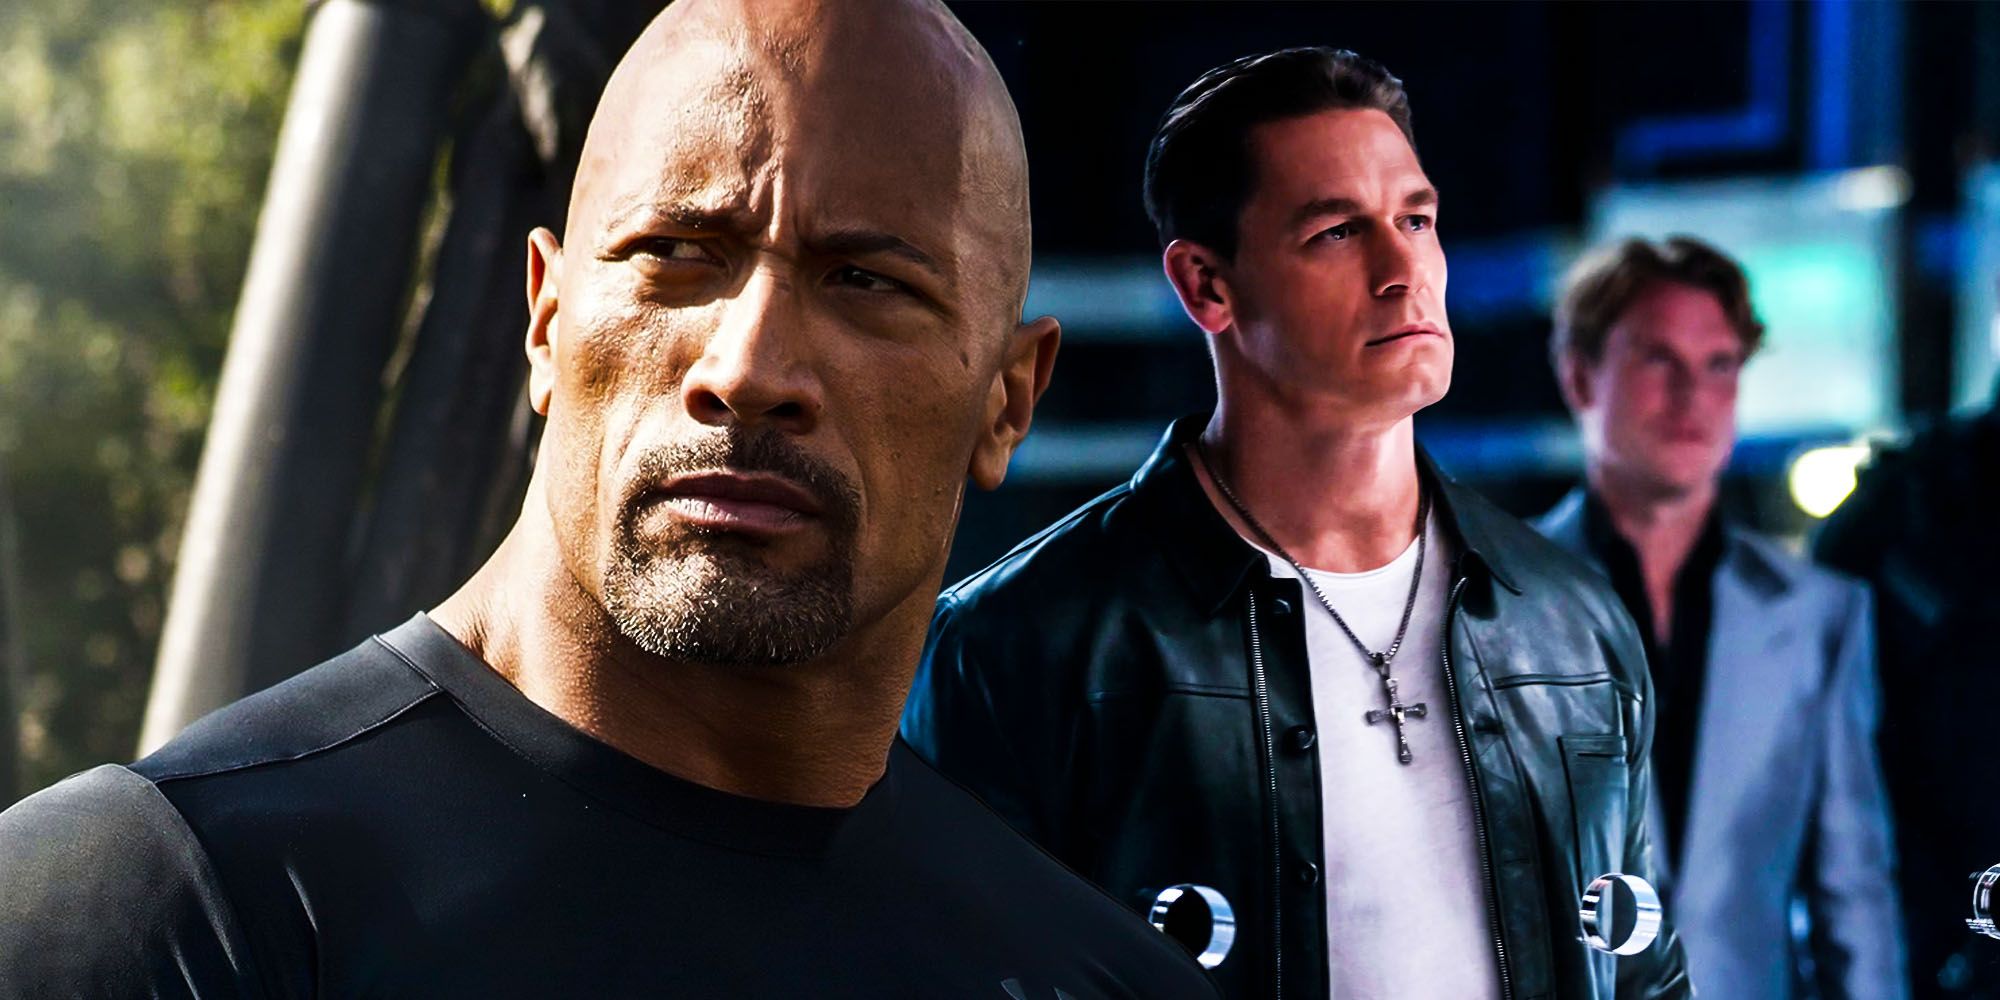 The Rock Fast and furious return to chase down Jakob Toretto